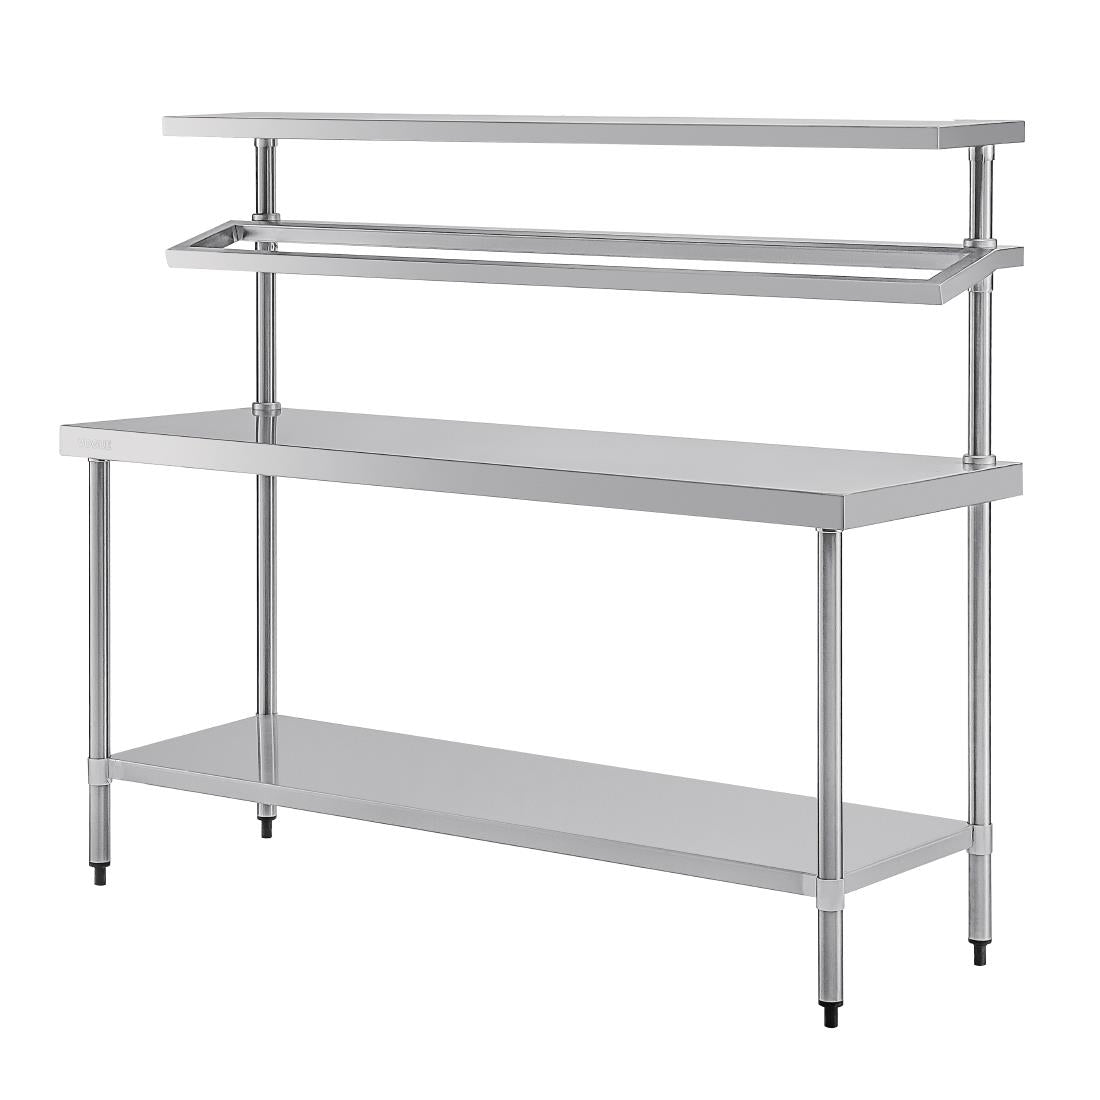 Vogue Stainless Steel Prep Station with Gantry Large